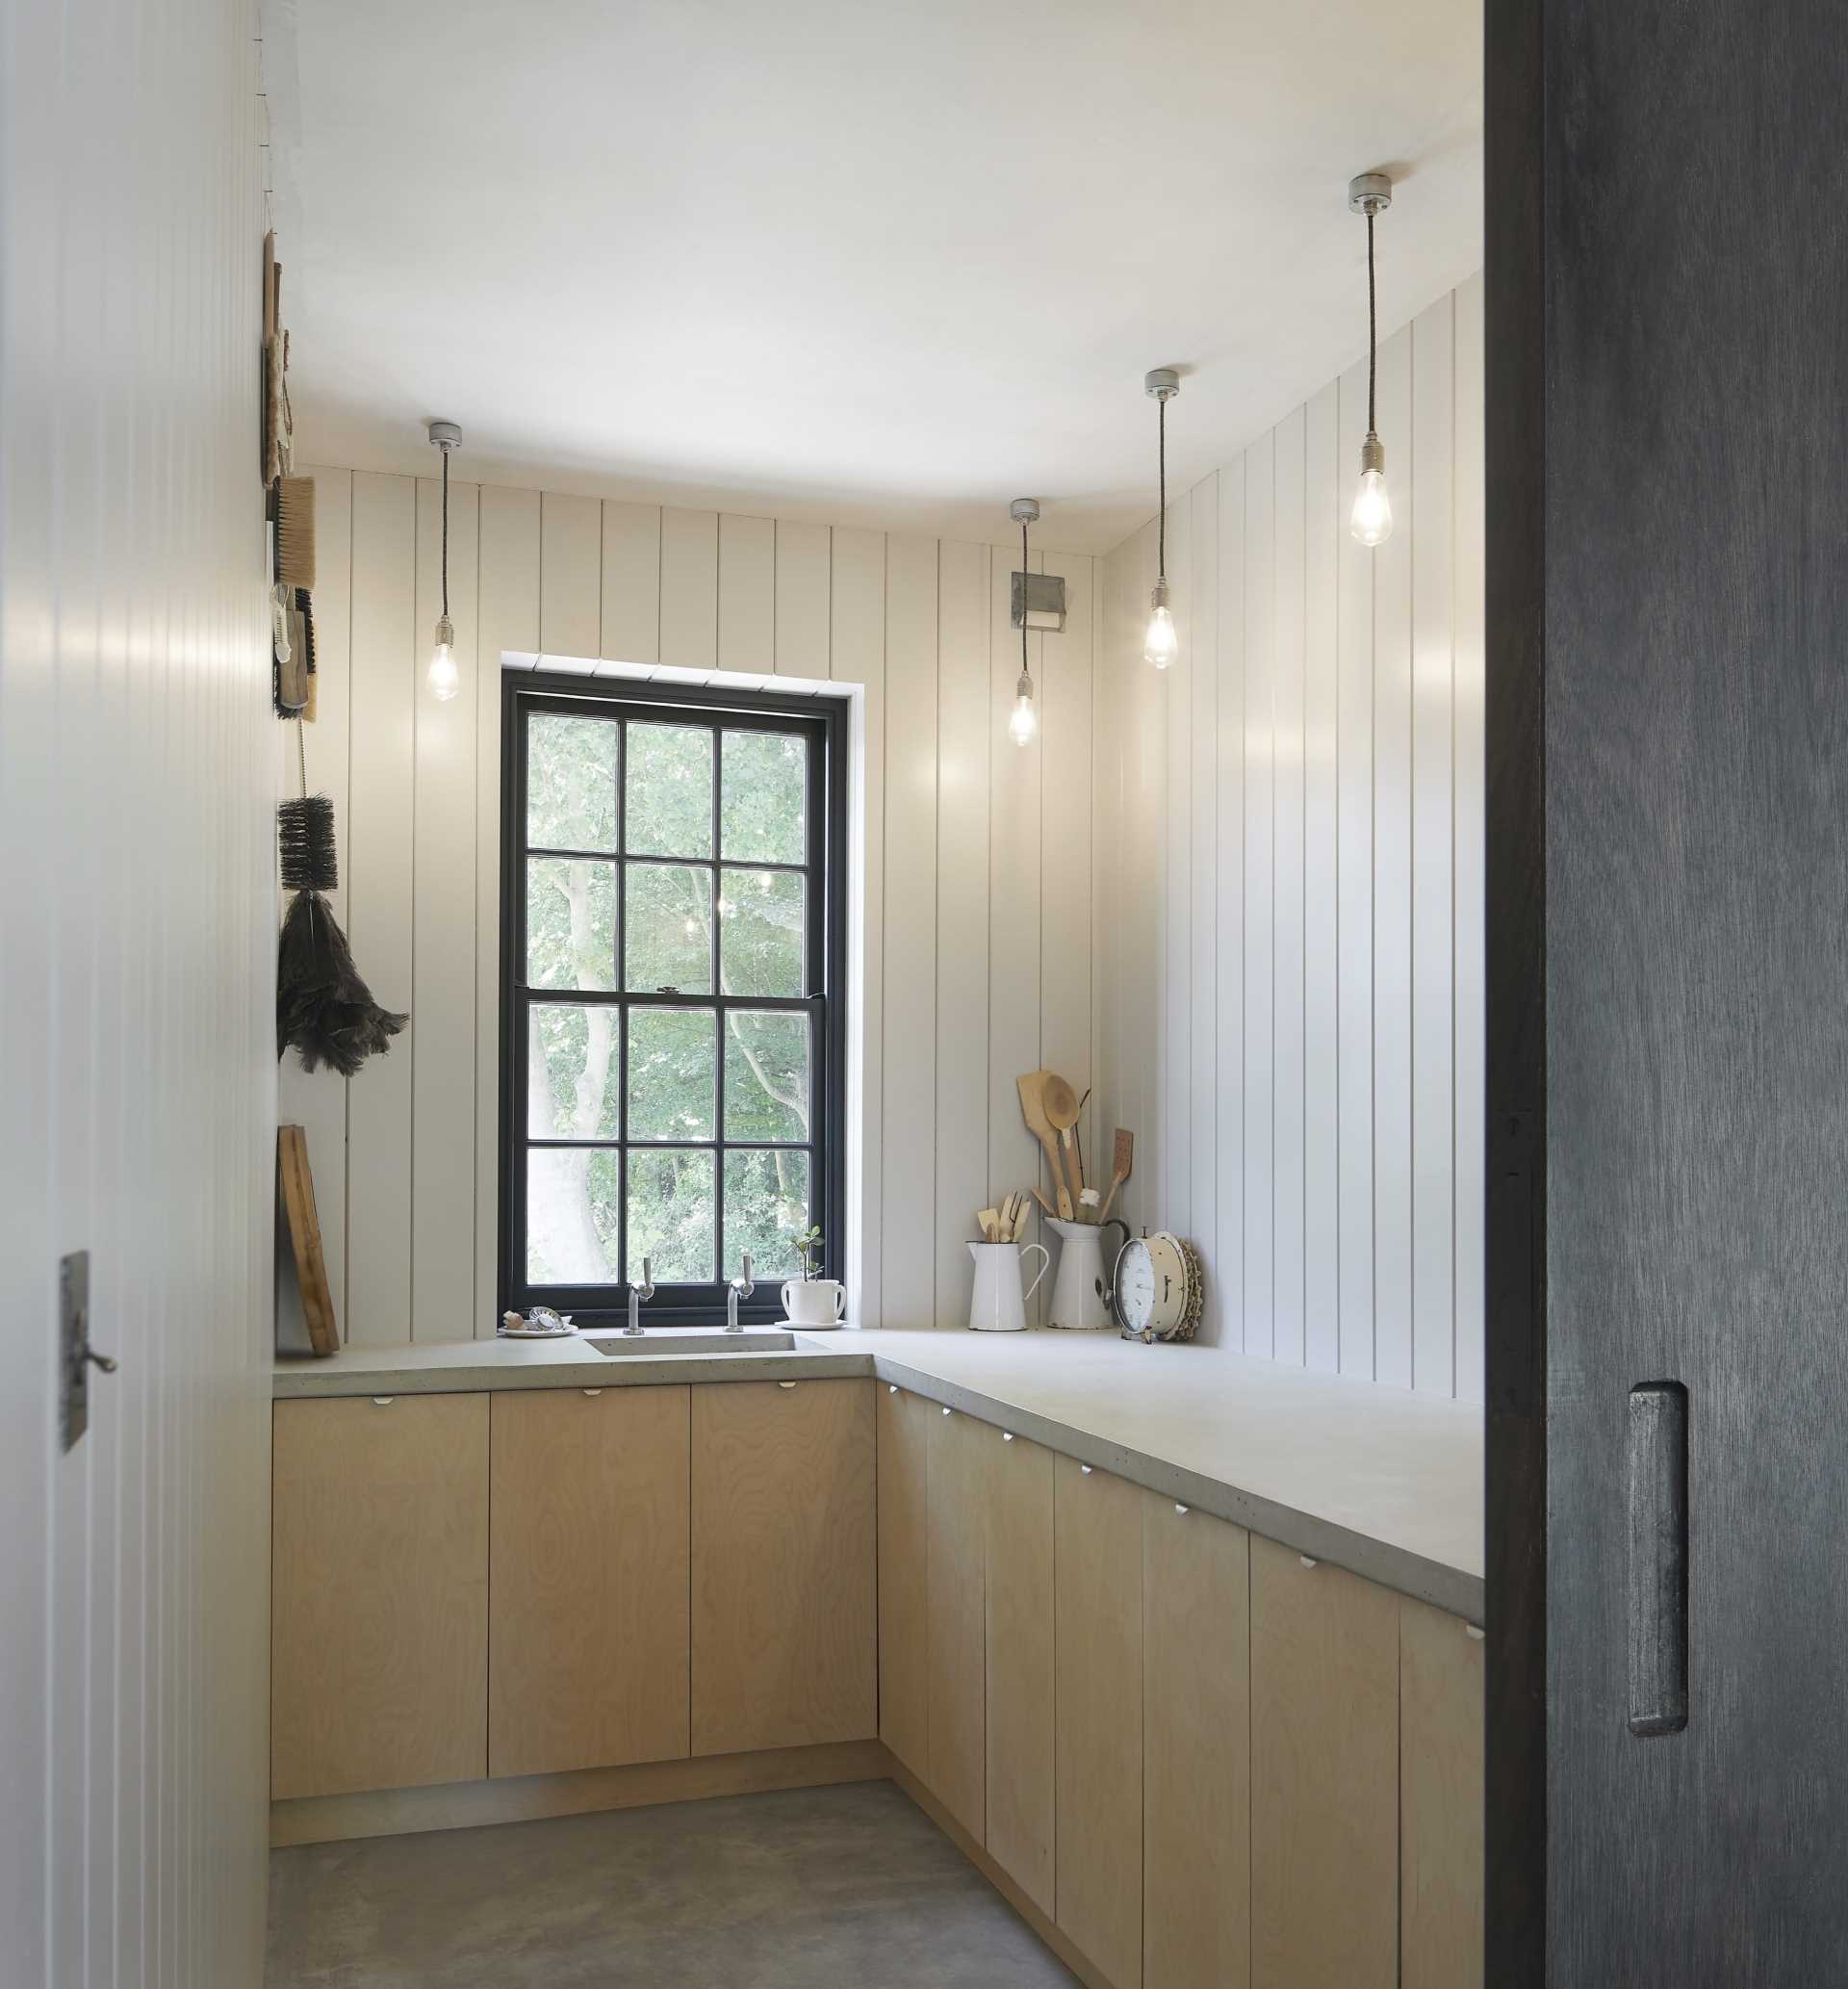 A contemporary pantry with white paneled walls and black window frame.